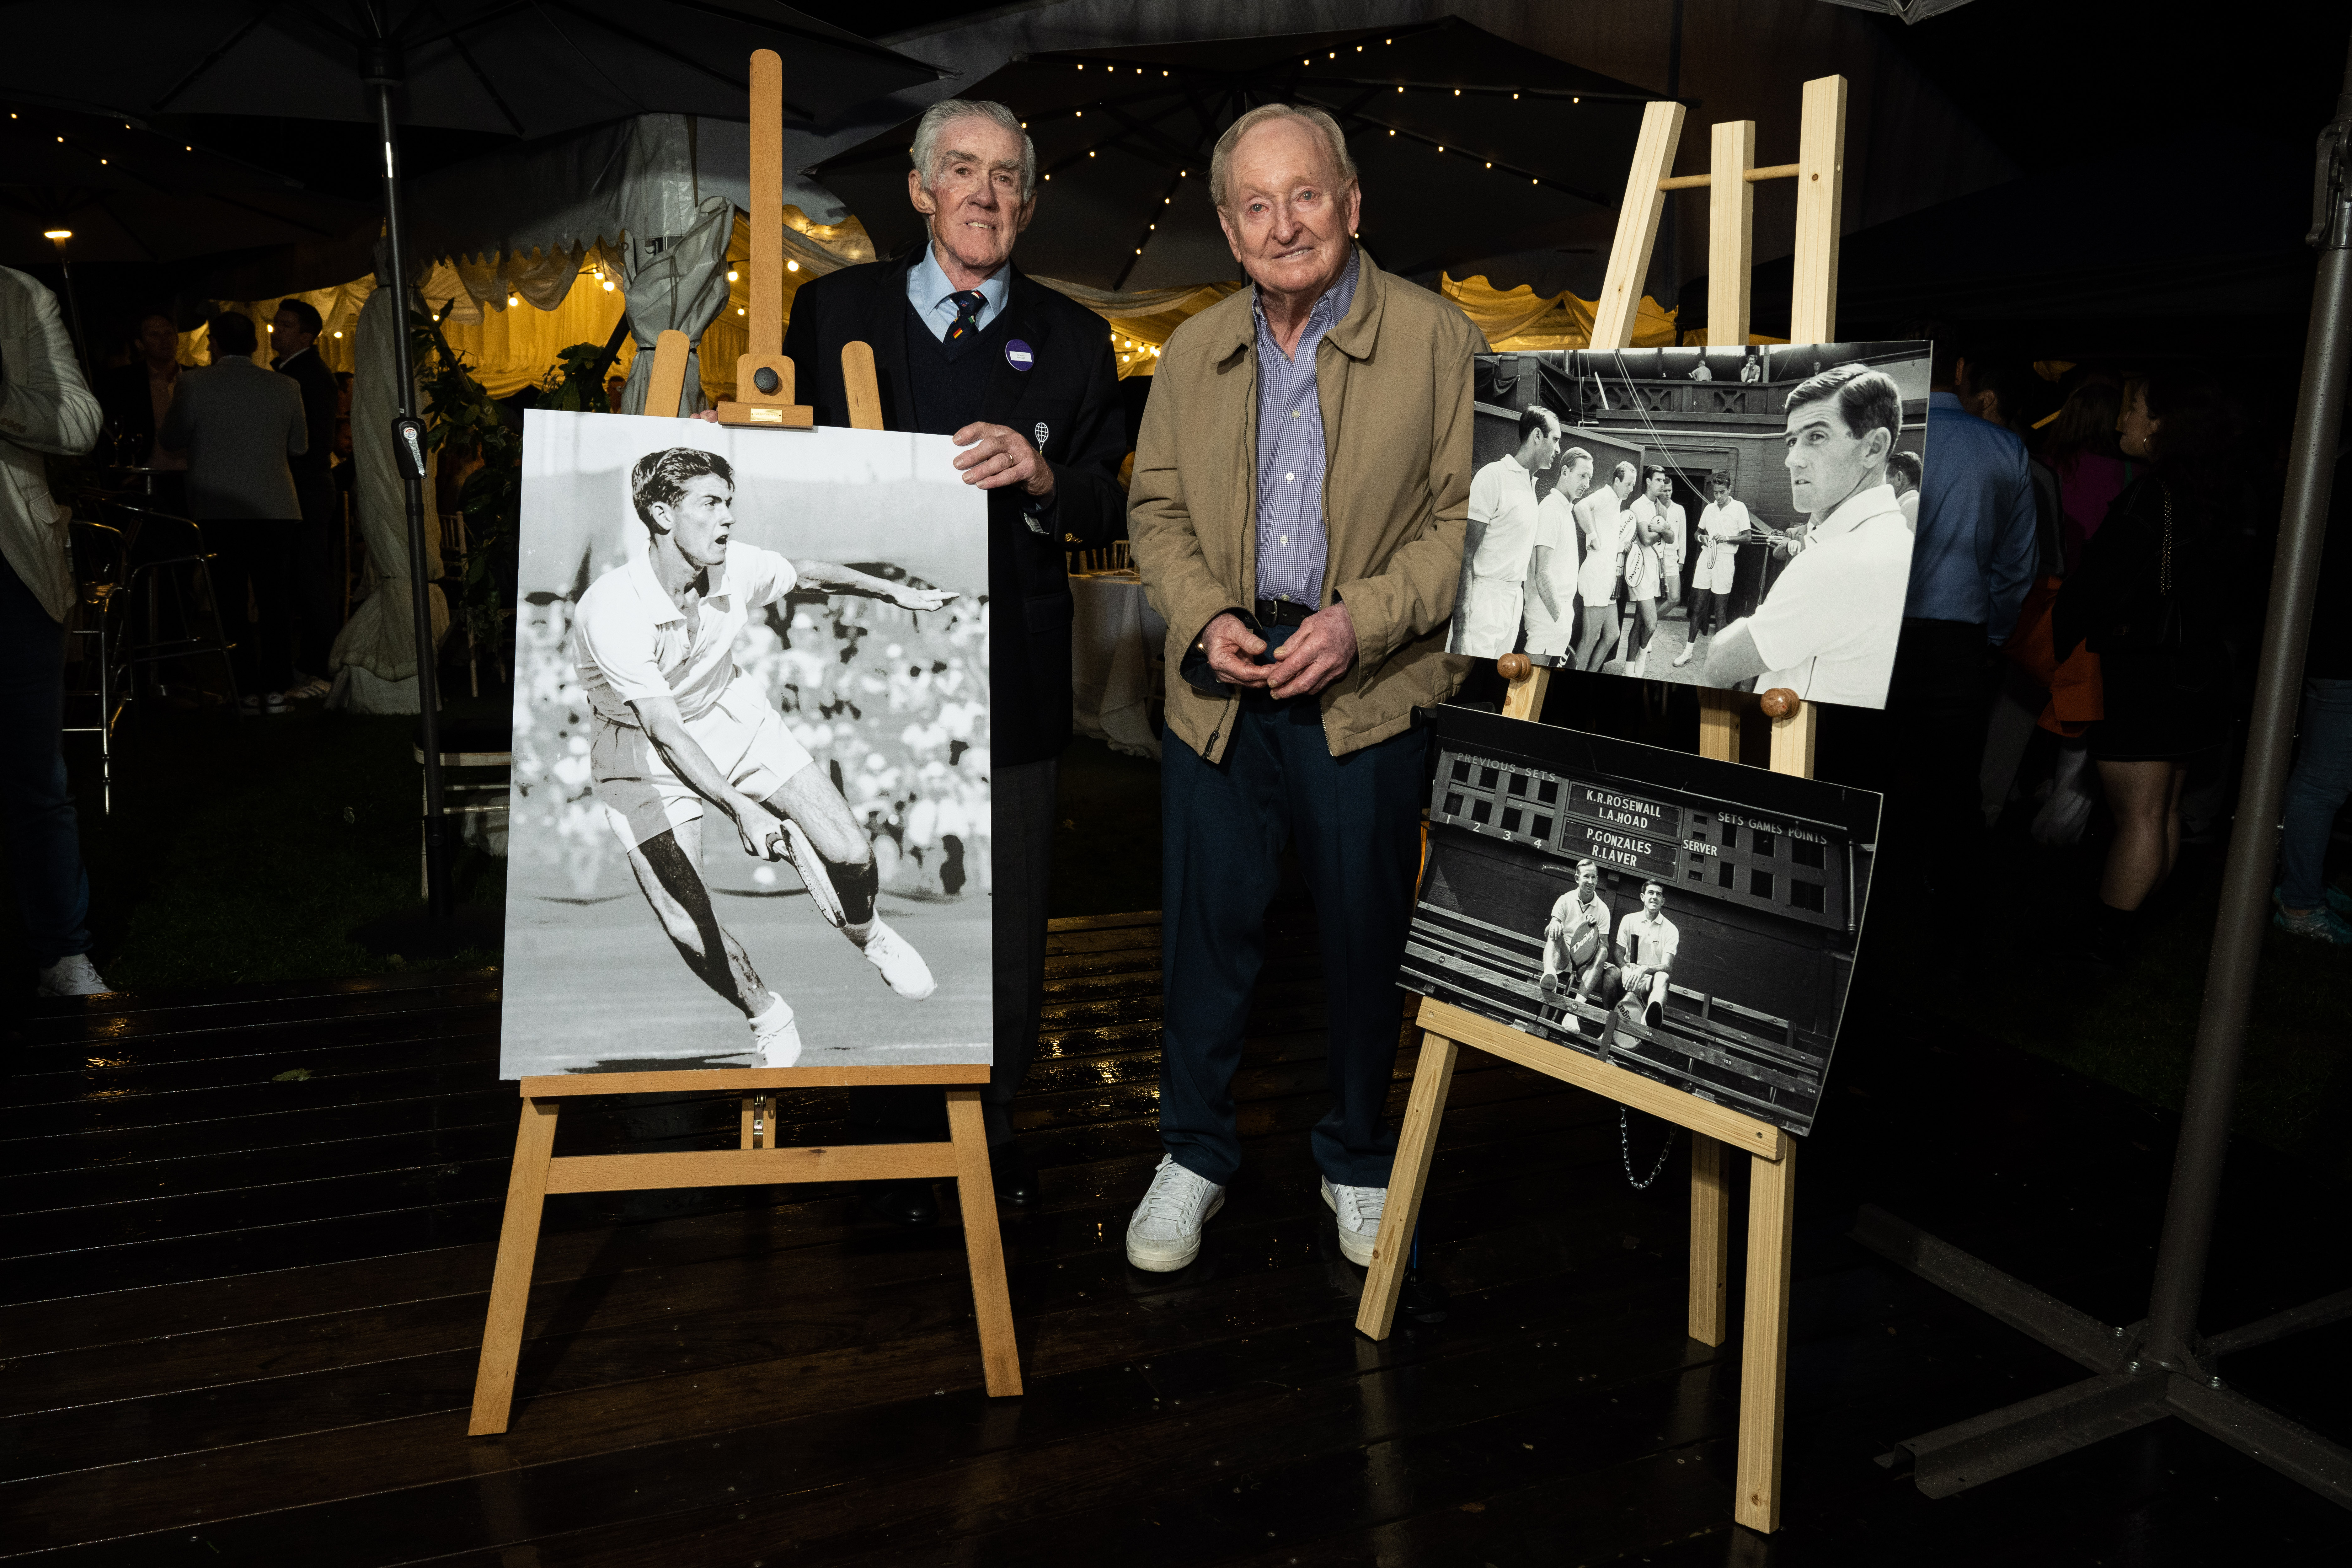 Ken Rosewall and Rod Laver at Tennis Australia's Legends of Lawn barbecue in London. Picture: Getty Images